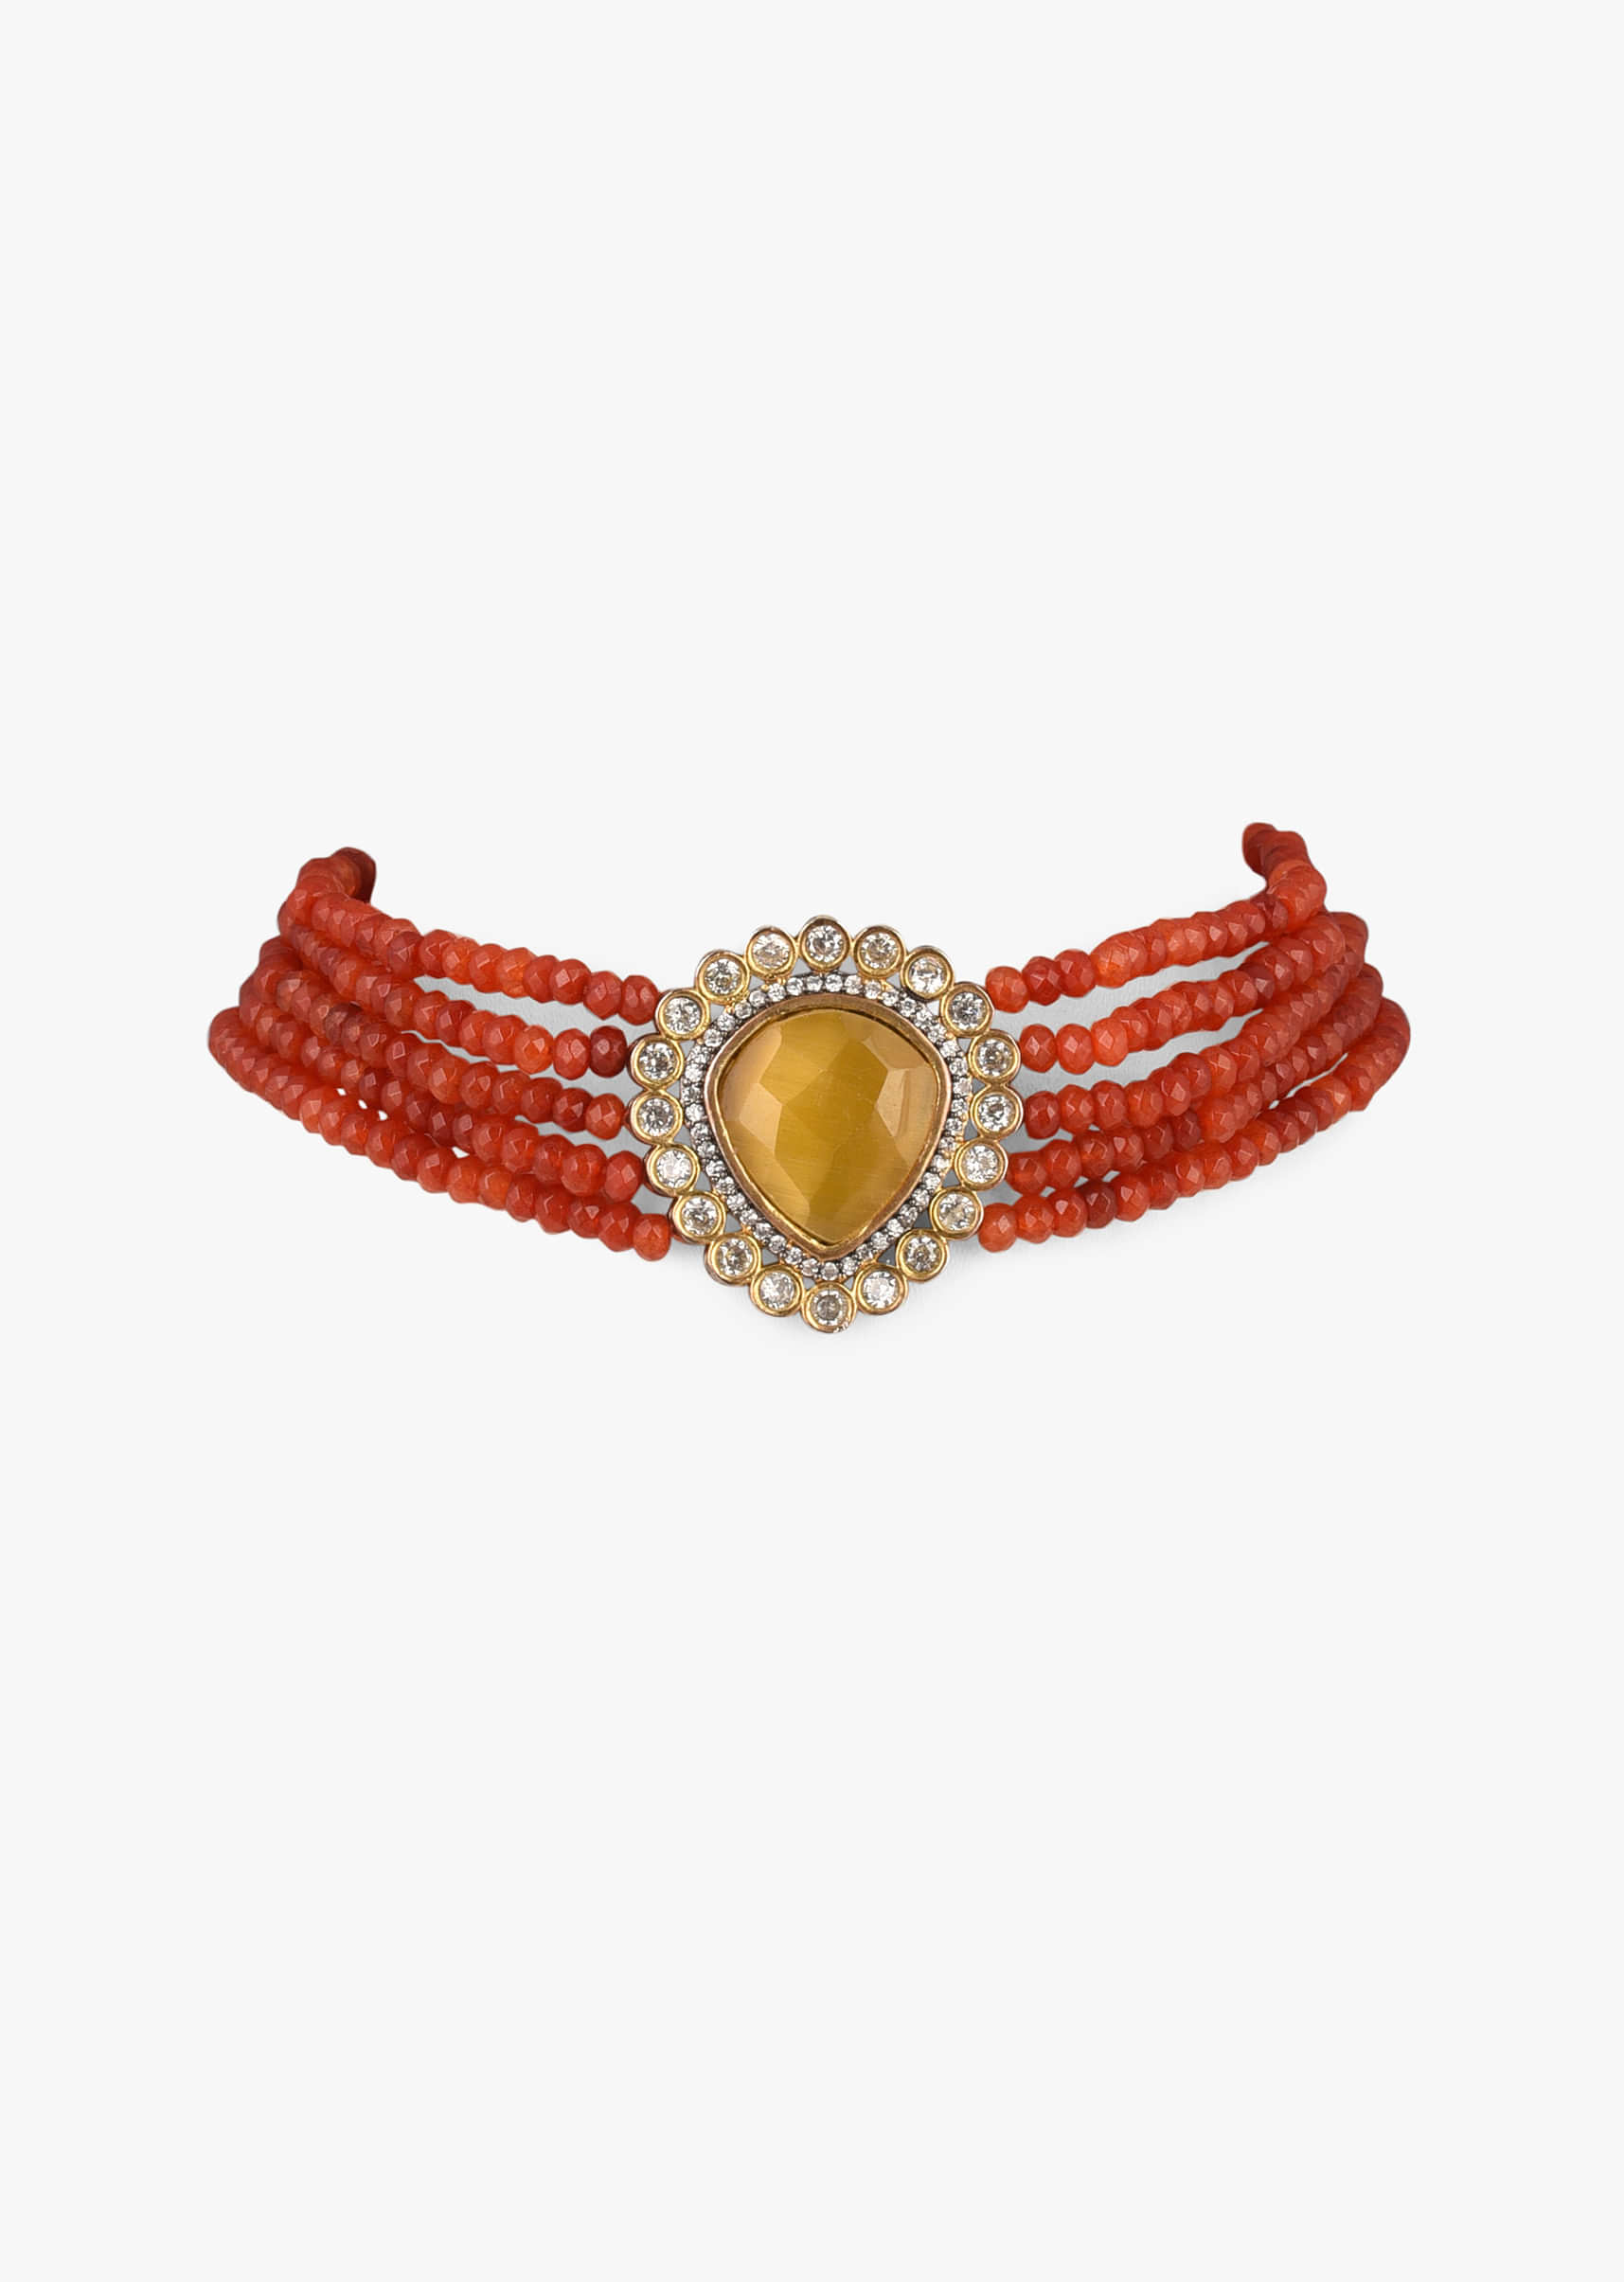 Gold Plated Choker Necklace With A Yellow Stone Centre And Coral Bead Strings 